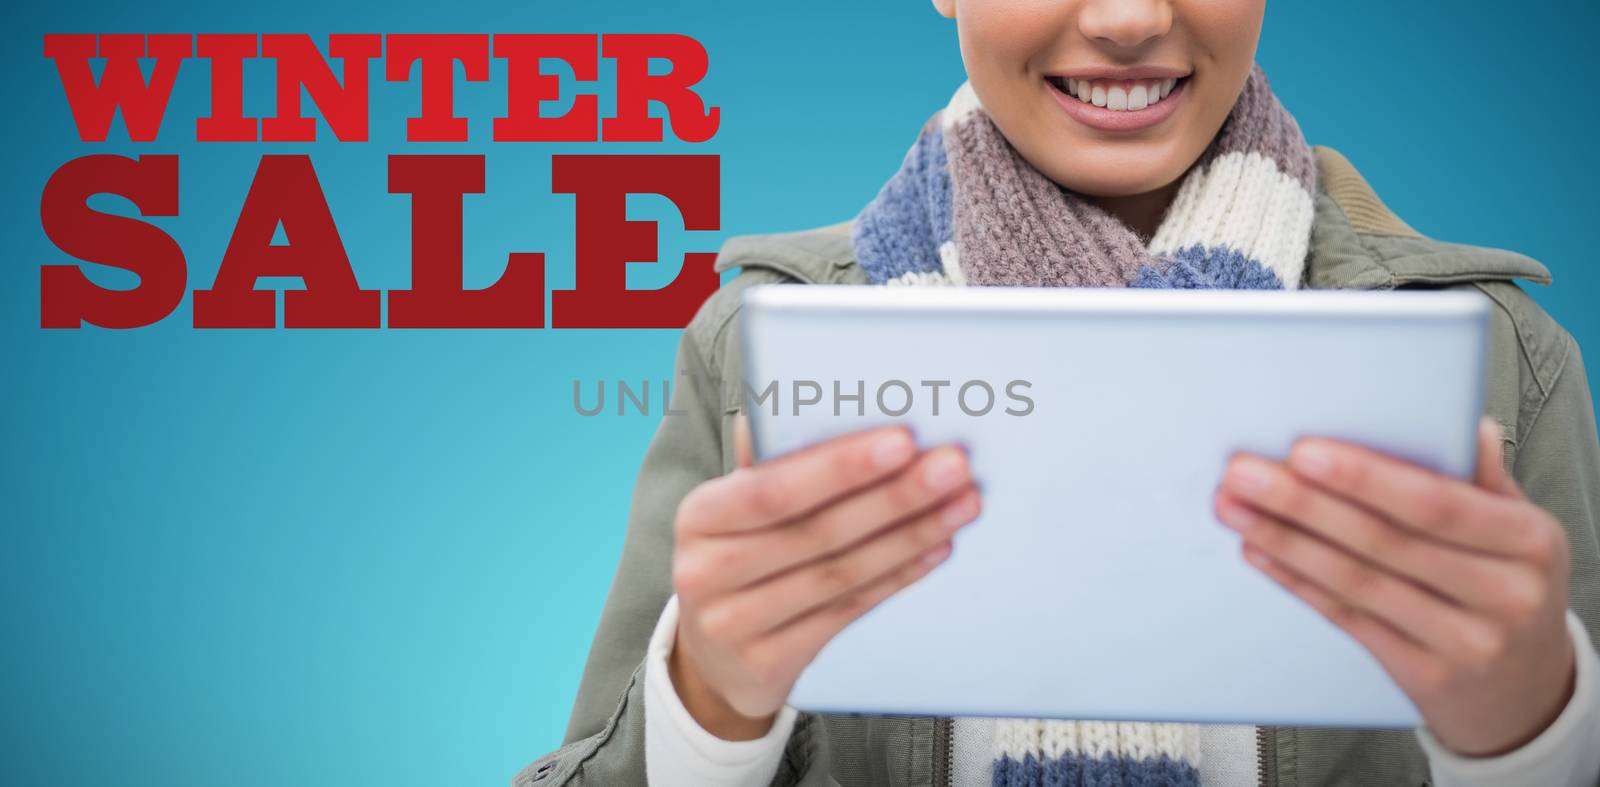 Composite image of  women holding tablet against abstract blue background